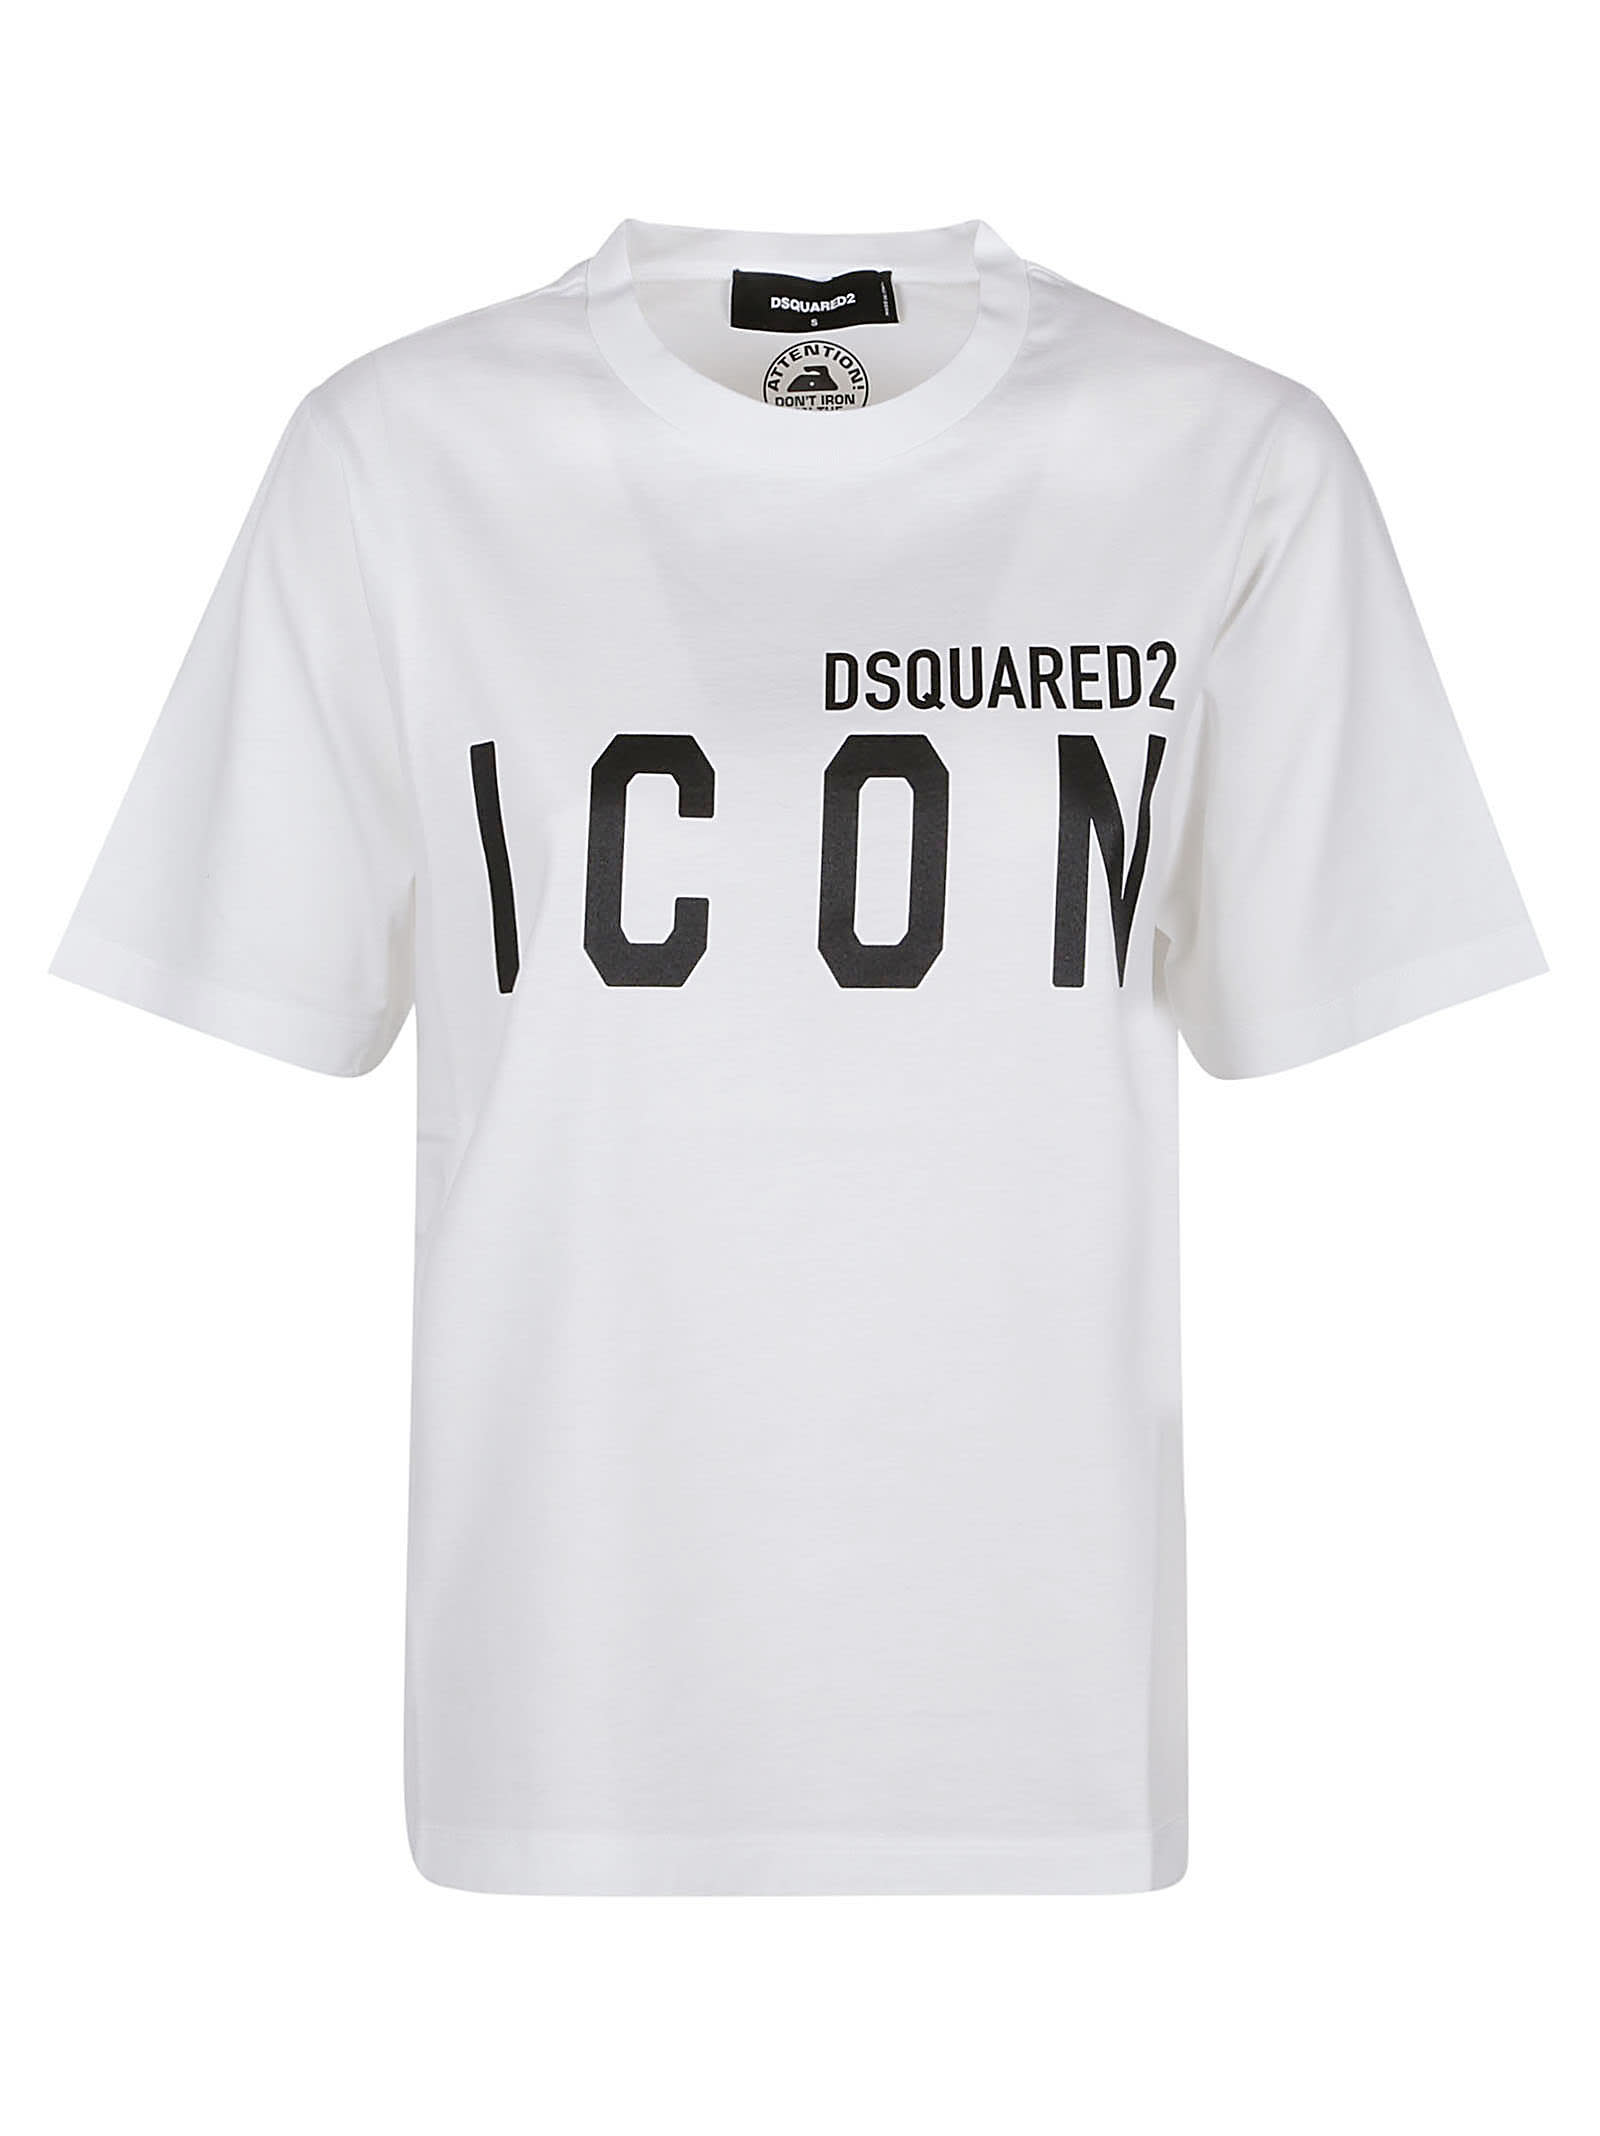 DSQUARED2 ICON FOREVER EASY T-SHIRT